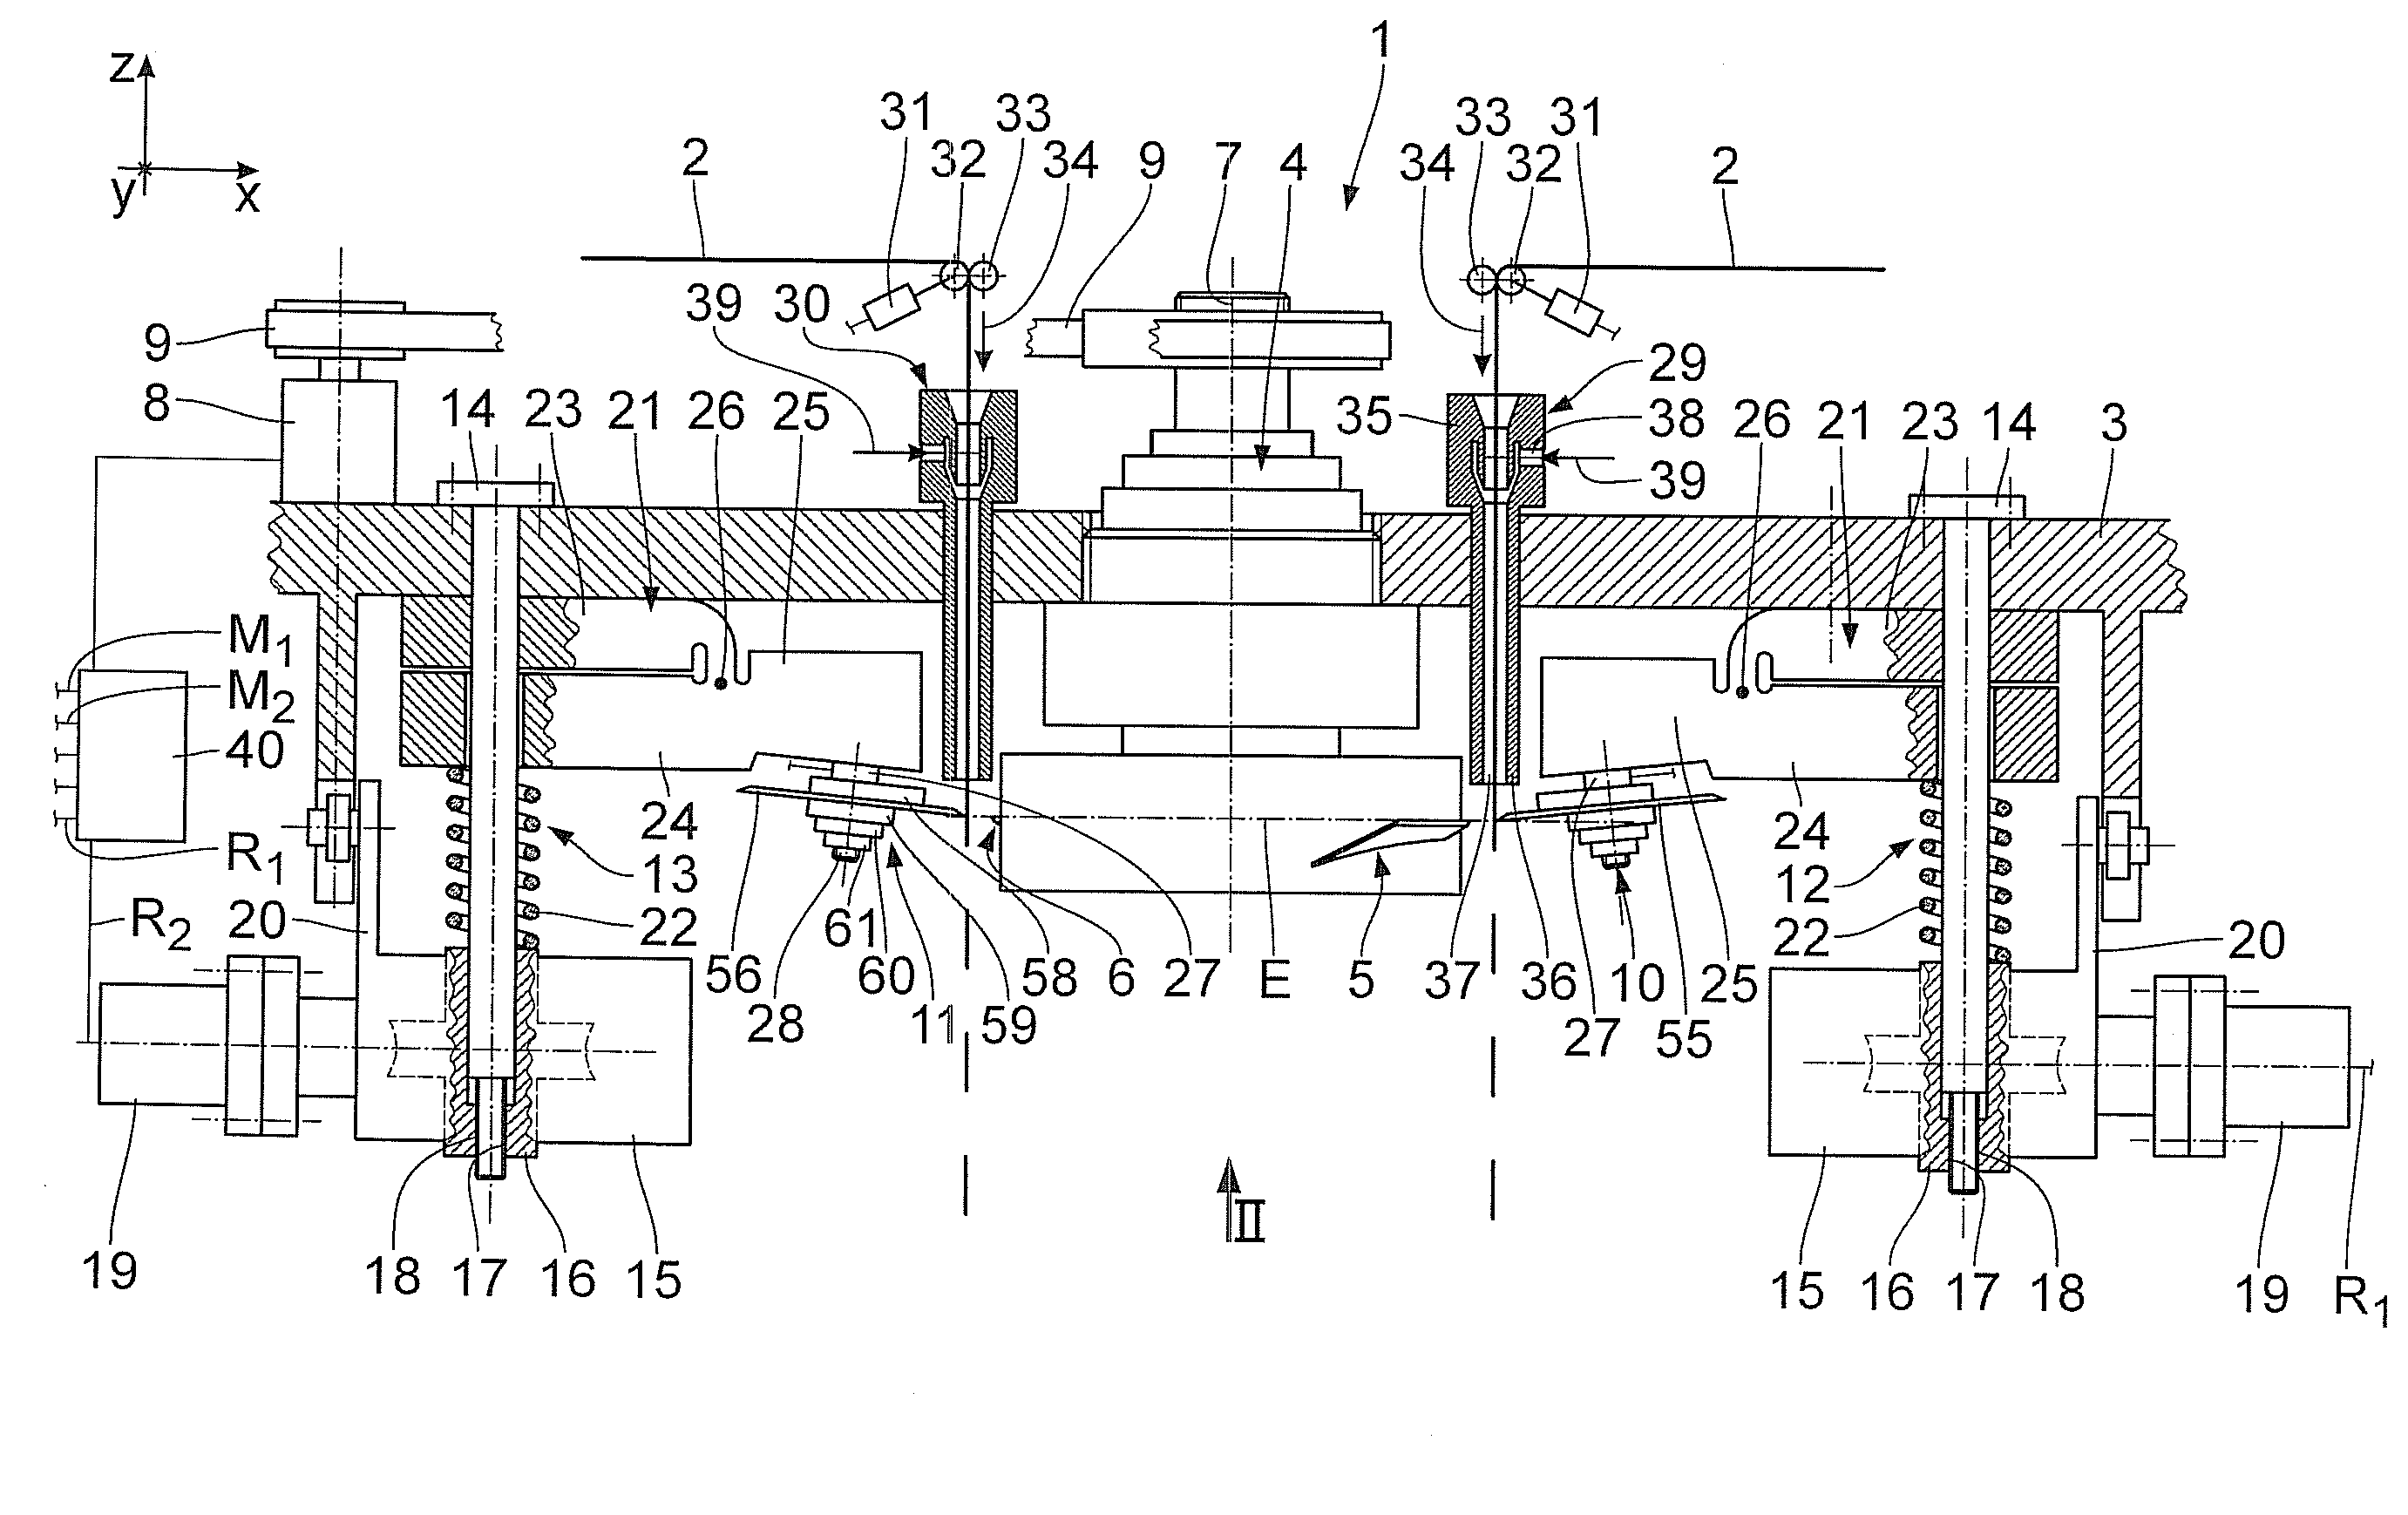 Cutting device for shear-cutting of fibre strands